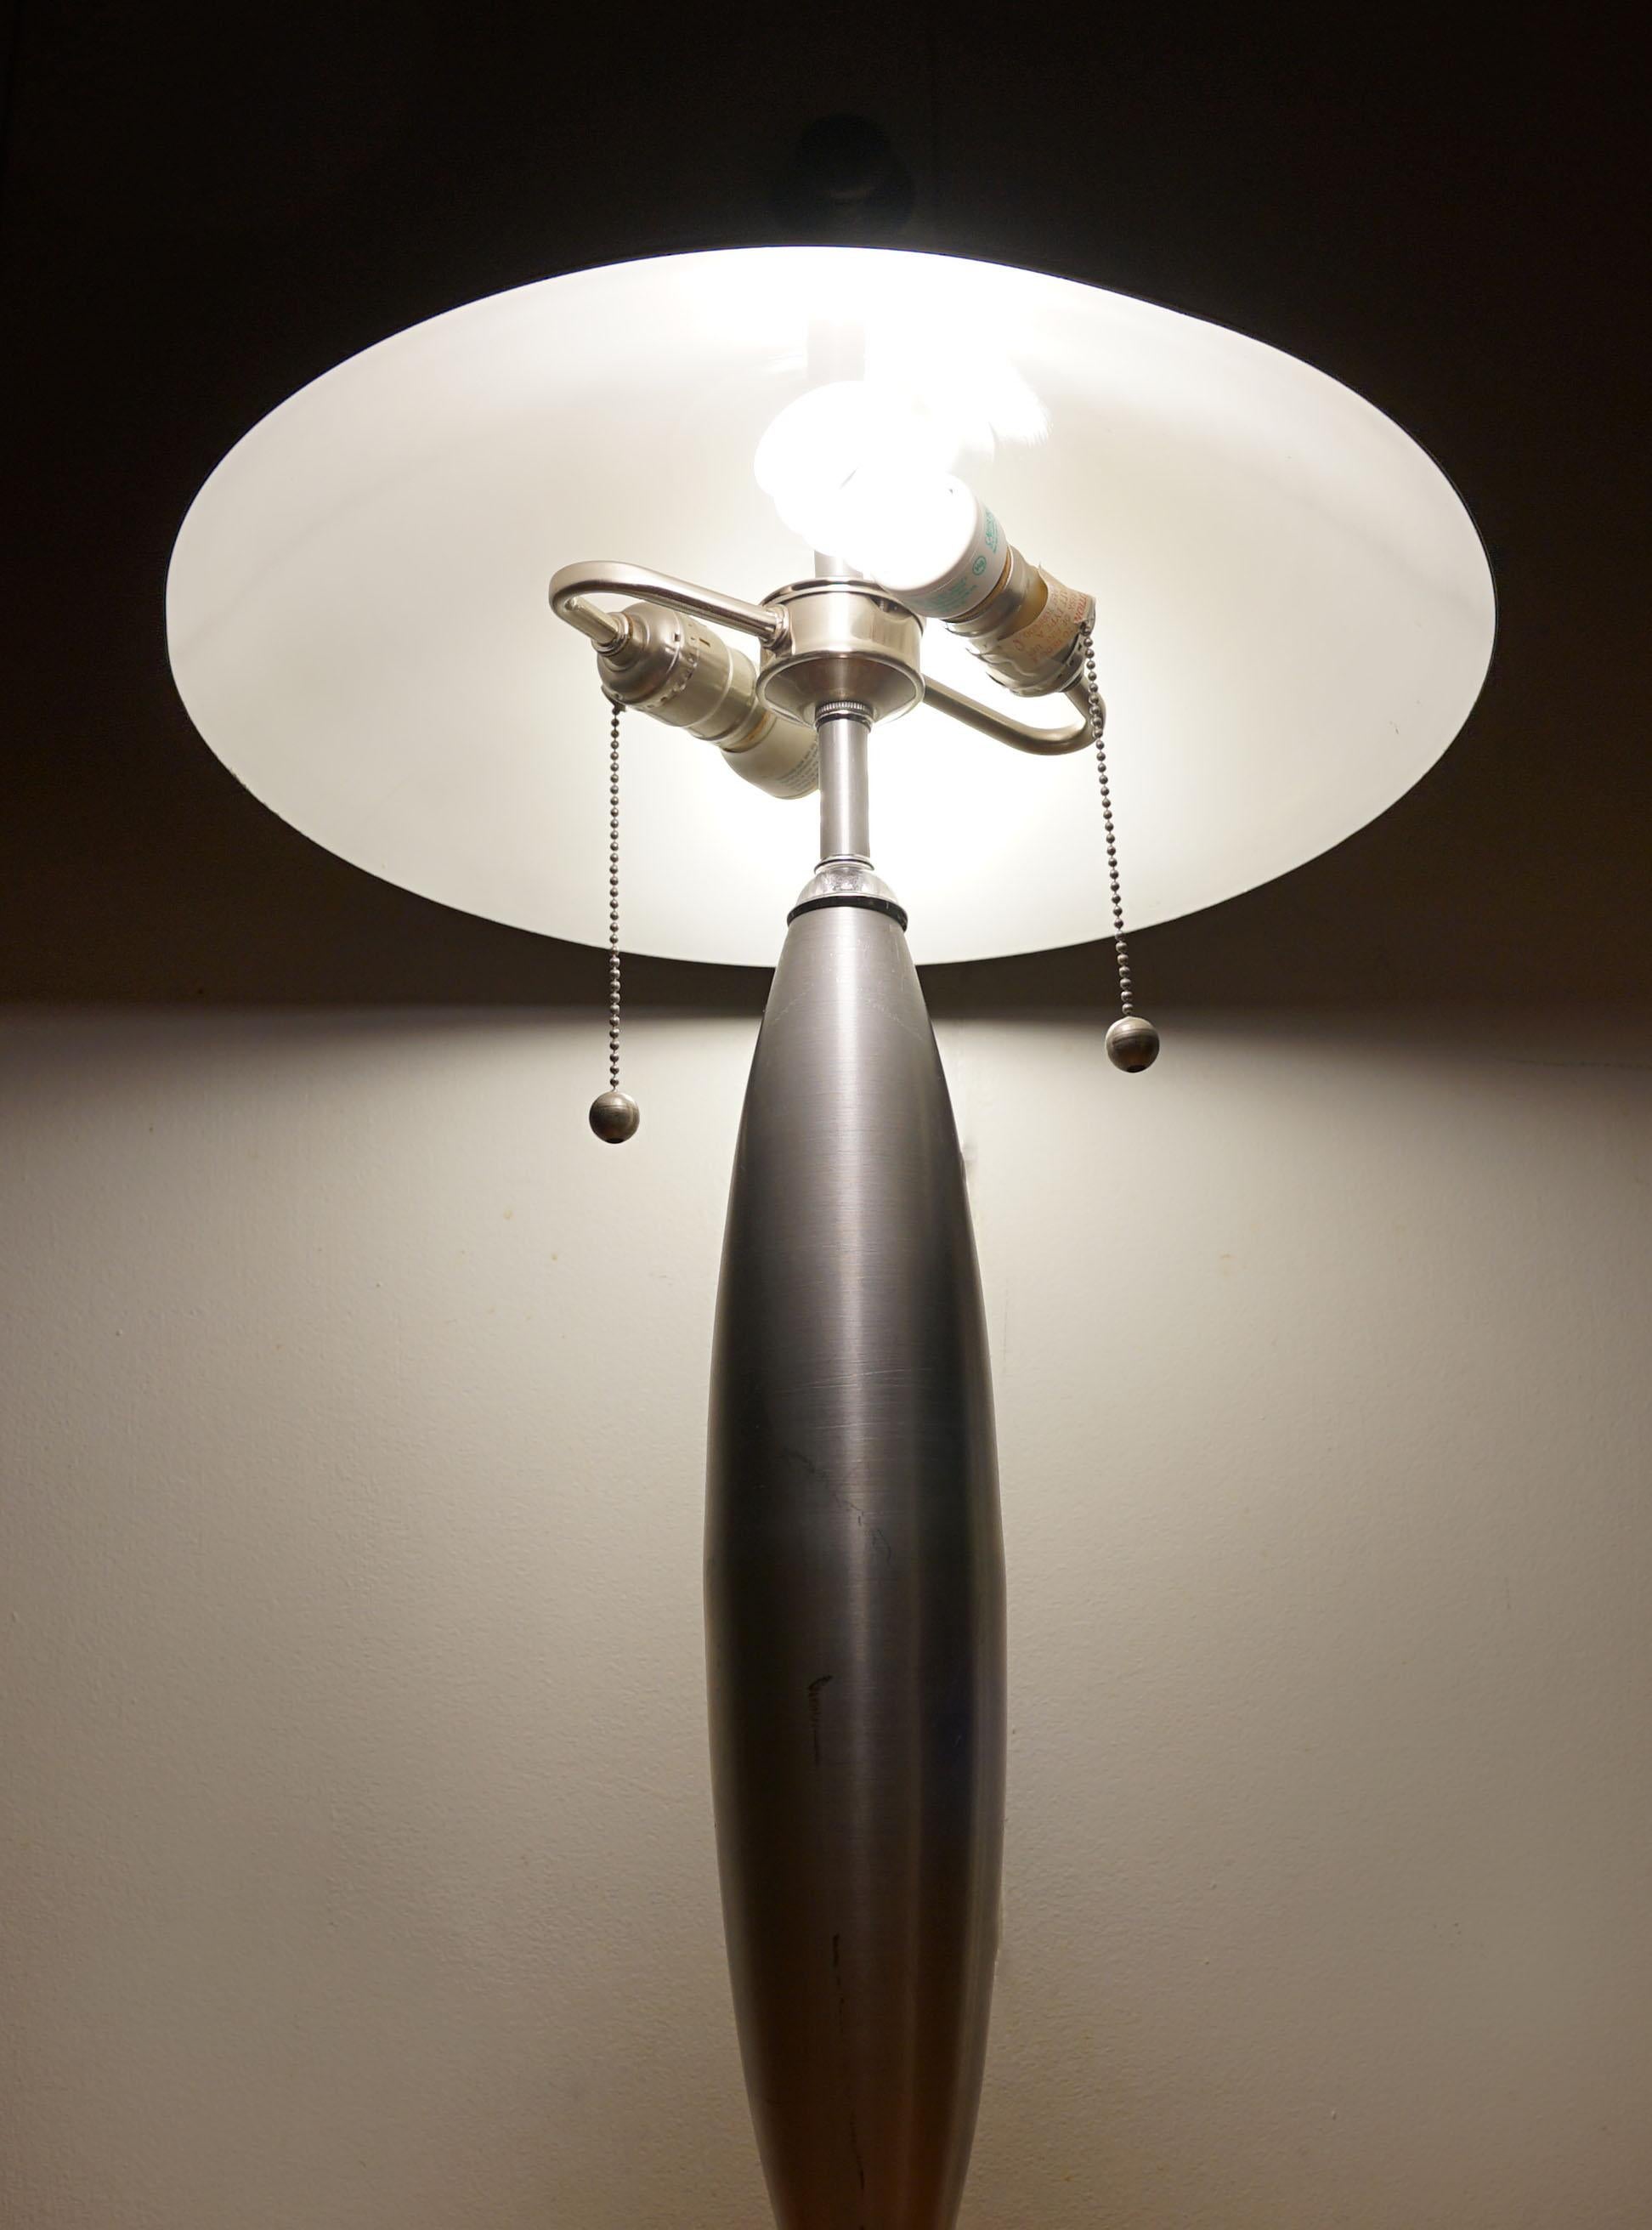 This lamp is special, and it is has a sleek futuristic look and brushed steel or chrome exterior. The lamp silhouette is striking with the wide dome and spherical stand. The double chains control dual sockets which allow for focused lighting. 
This